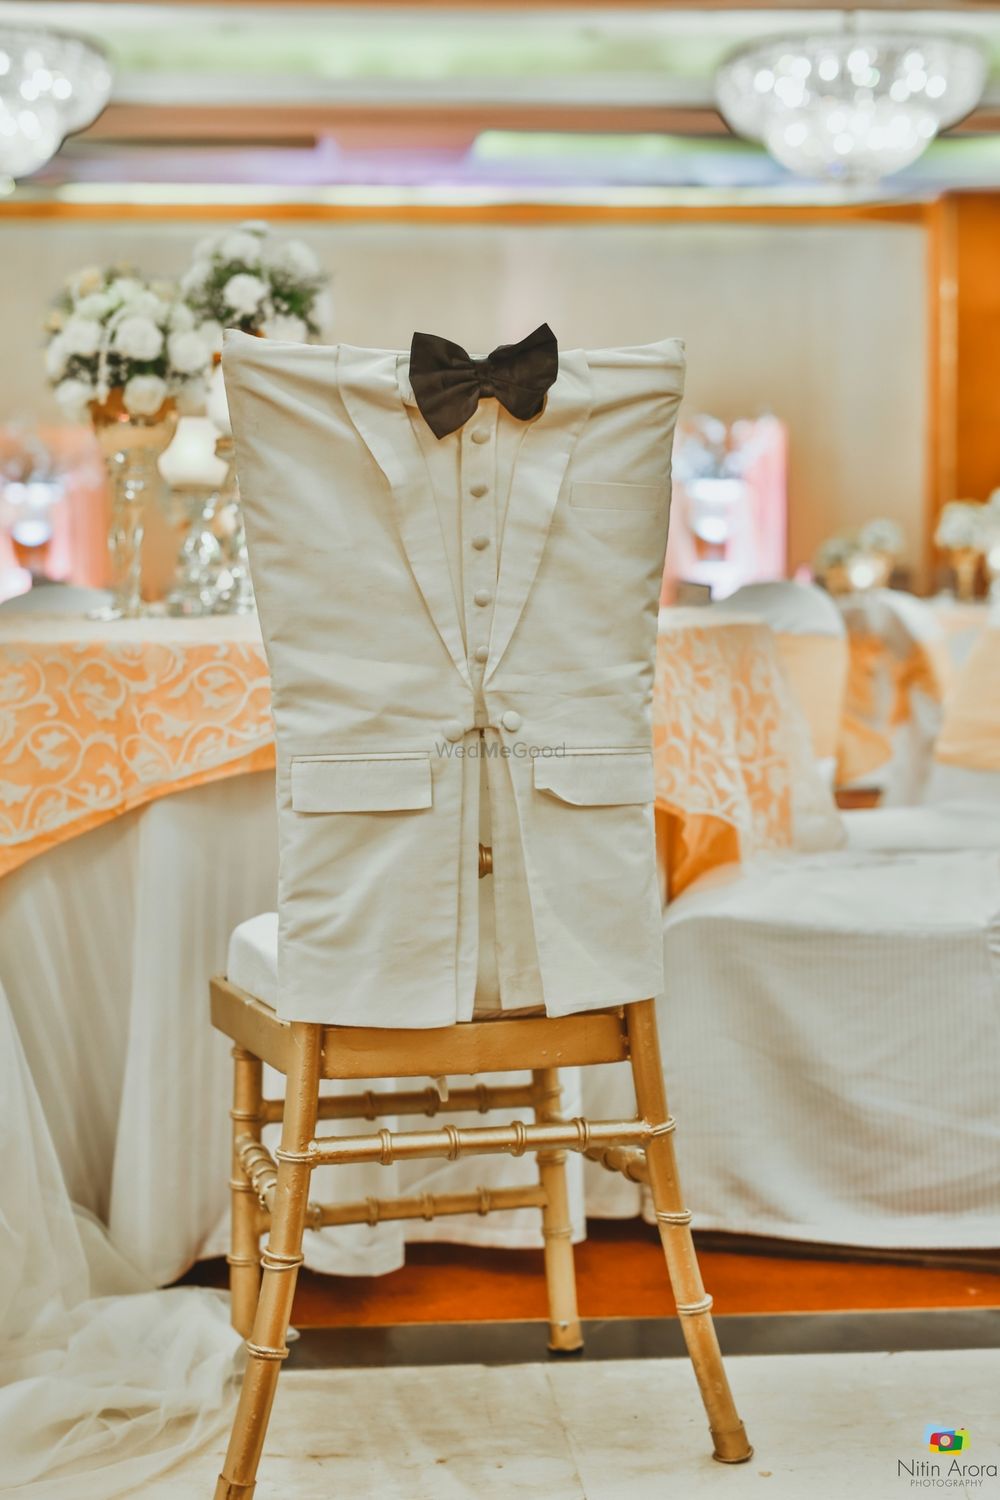 Photo of Groom chair with bow tie and suit